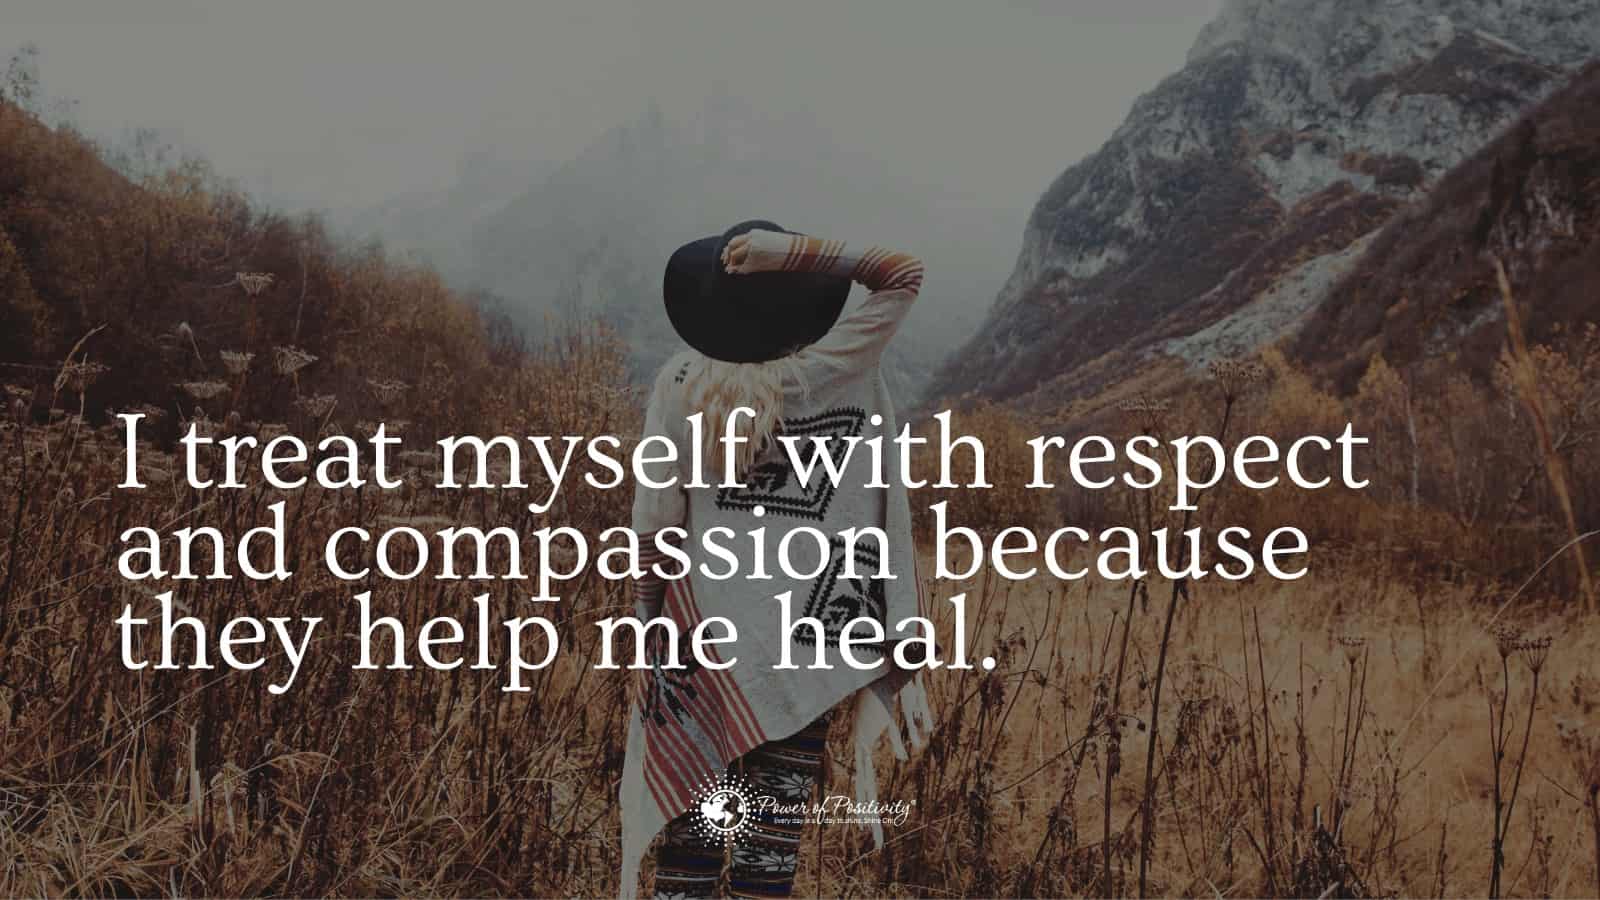 20 Affirmations for Healing to Help Put Things in Perspective